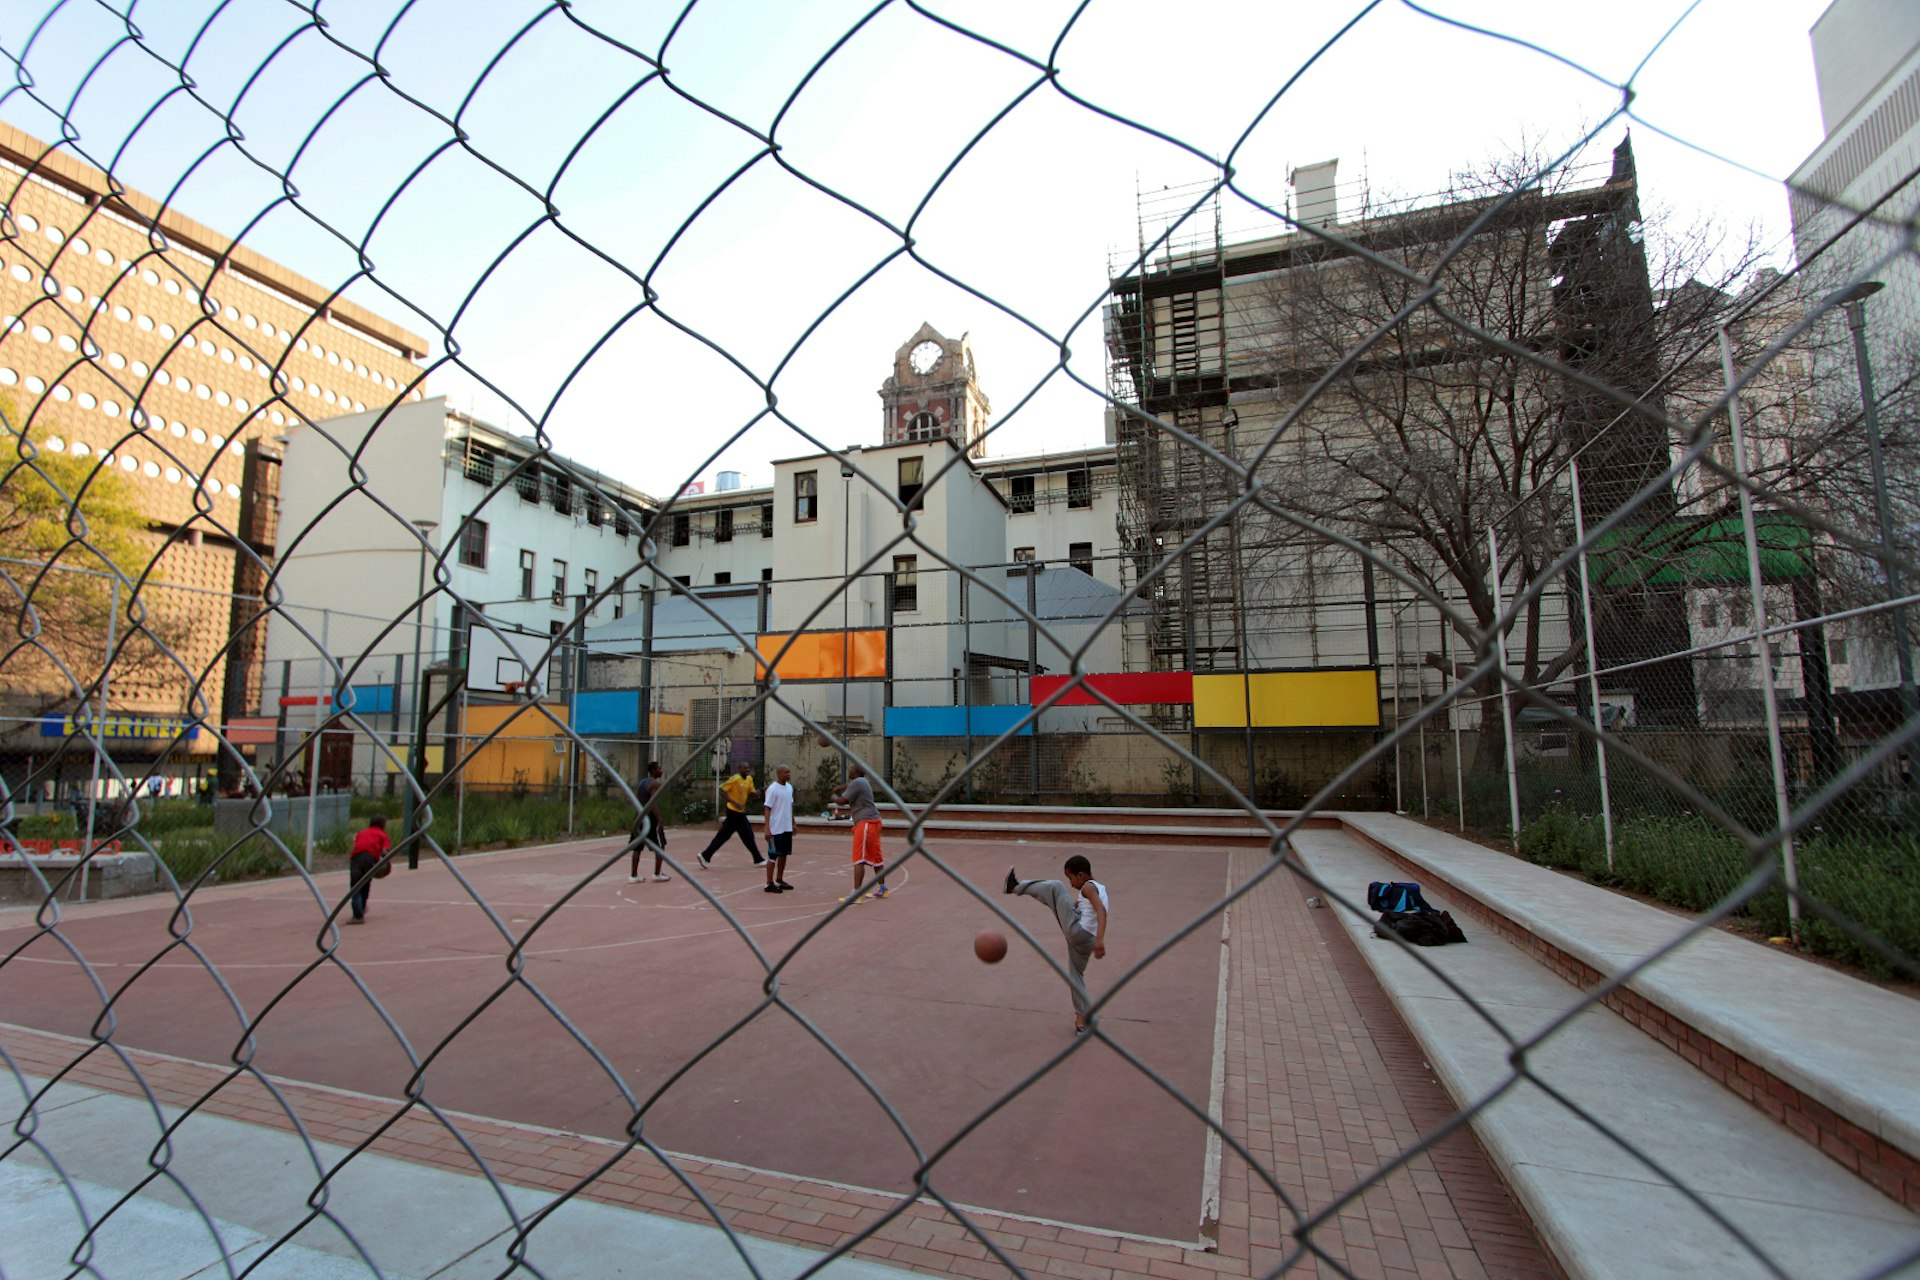 Looking through the chainlinked fence at the public basektball court in Ernest Oppenheimer Park, with a group in action - a young boy in the foreground tries to bounce the ball between his legs © Heather Mason / Lonely Planet